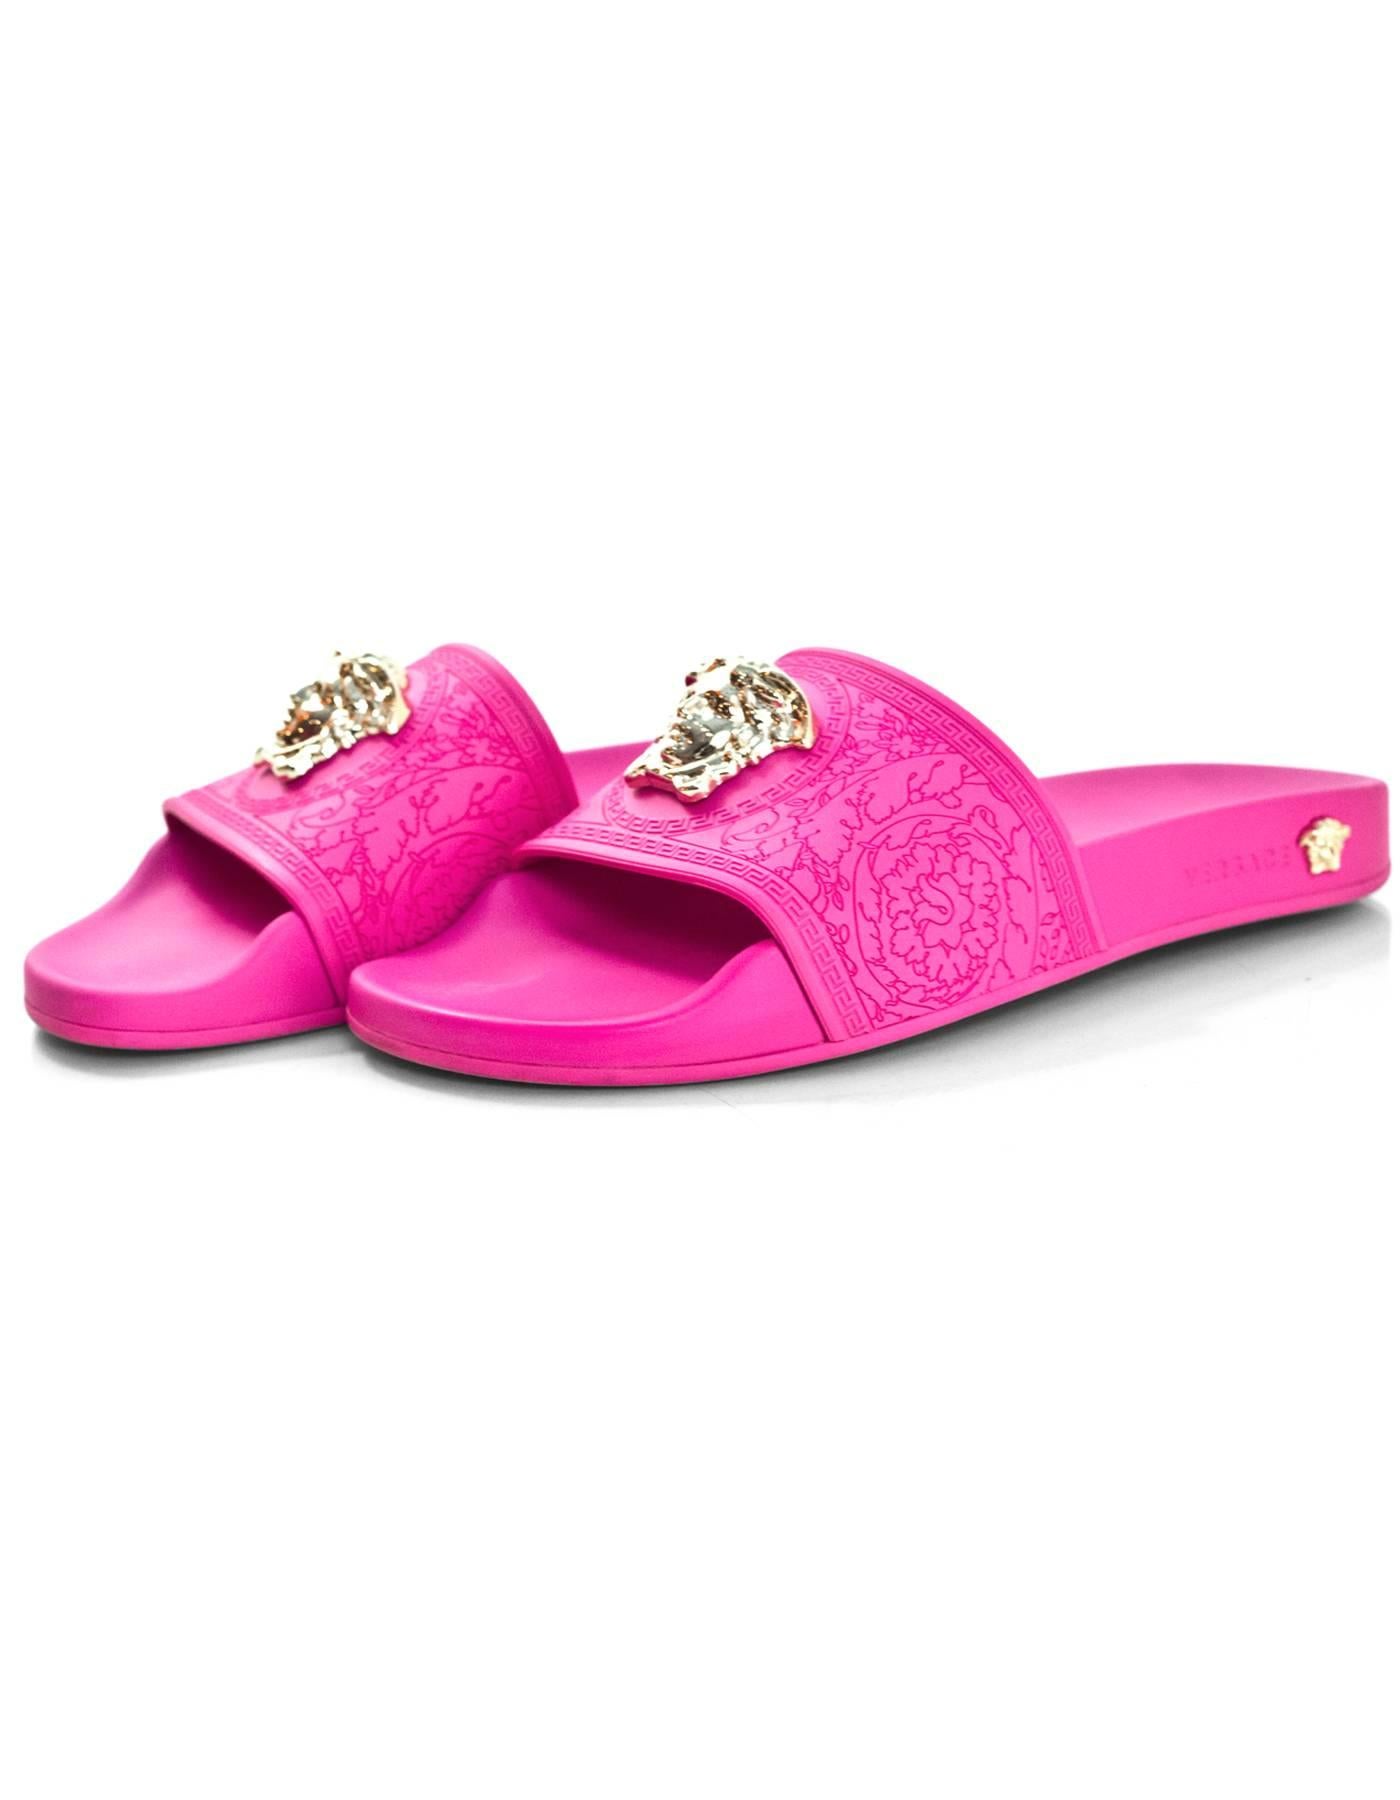 Versace Hot Pink Medusa Slide Sandals Sz 39

Made In: Italy
Color: Hot pink
Retail Price: $395 + tax
Materials: Rubber
Closure/Opening: Slide
Sole Stamp: Versace Made in Italy
Overall Condition: Excellent pre-owned condition with the exception of